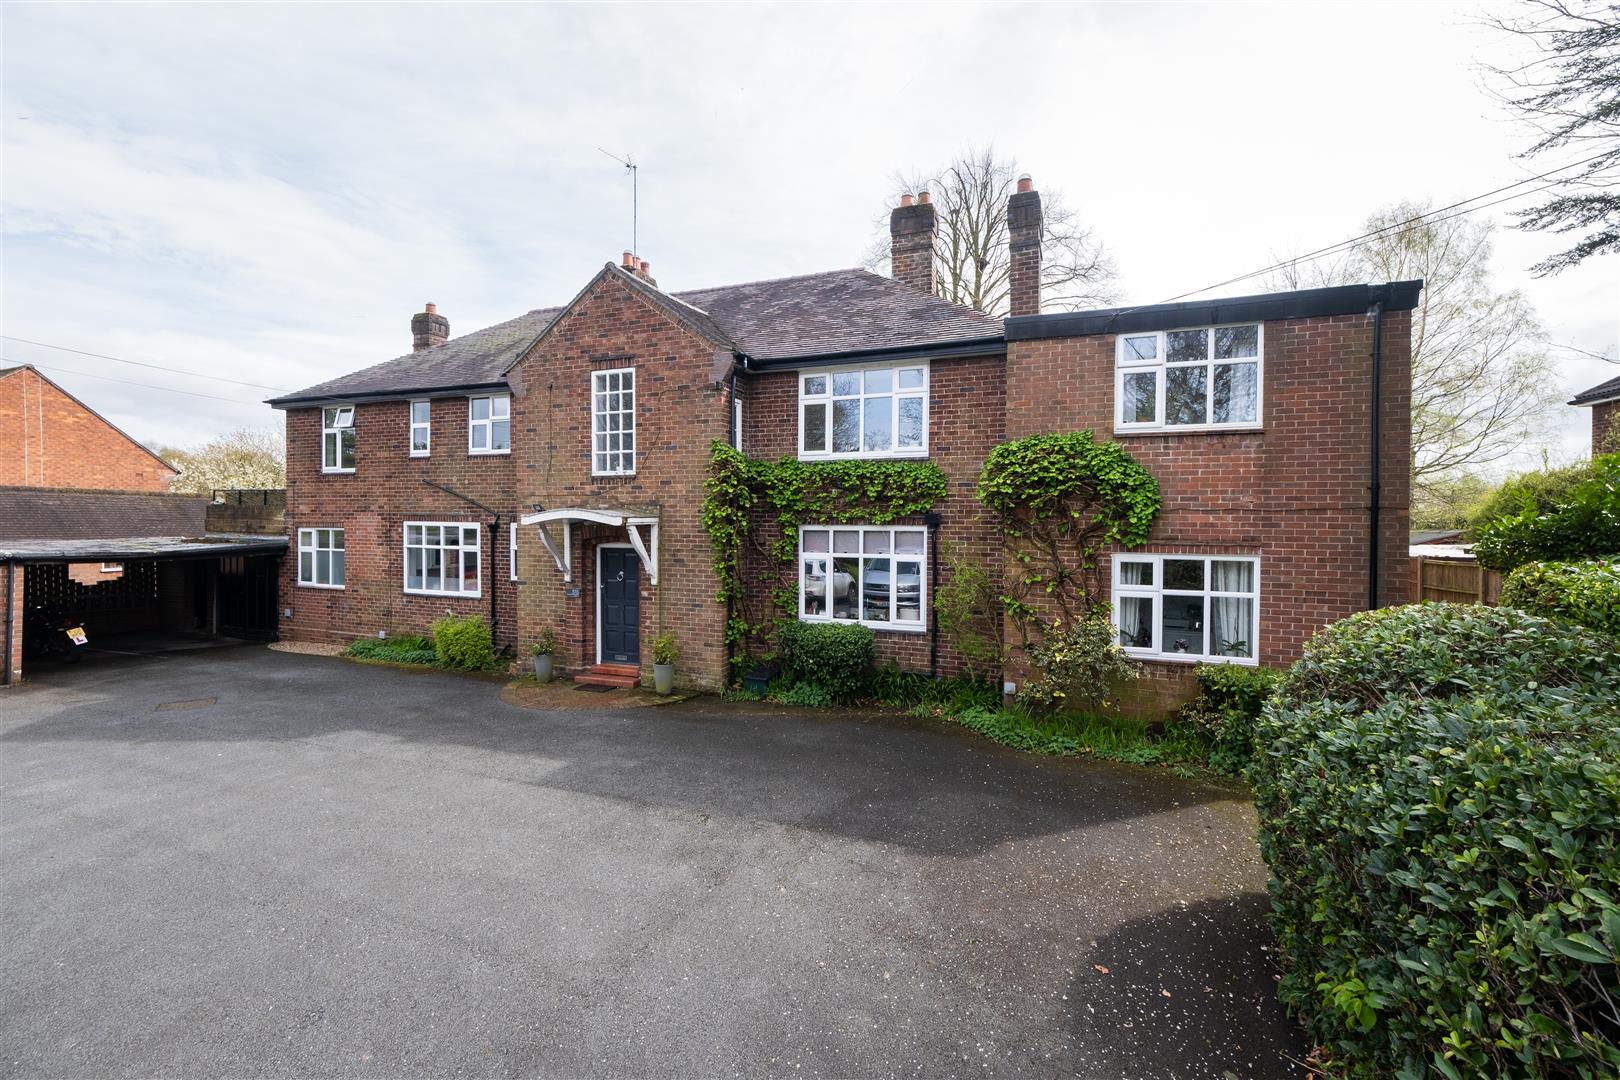 2 bedroom  Flat for Sale in Northwich